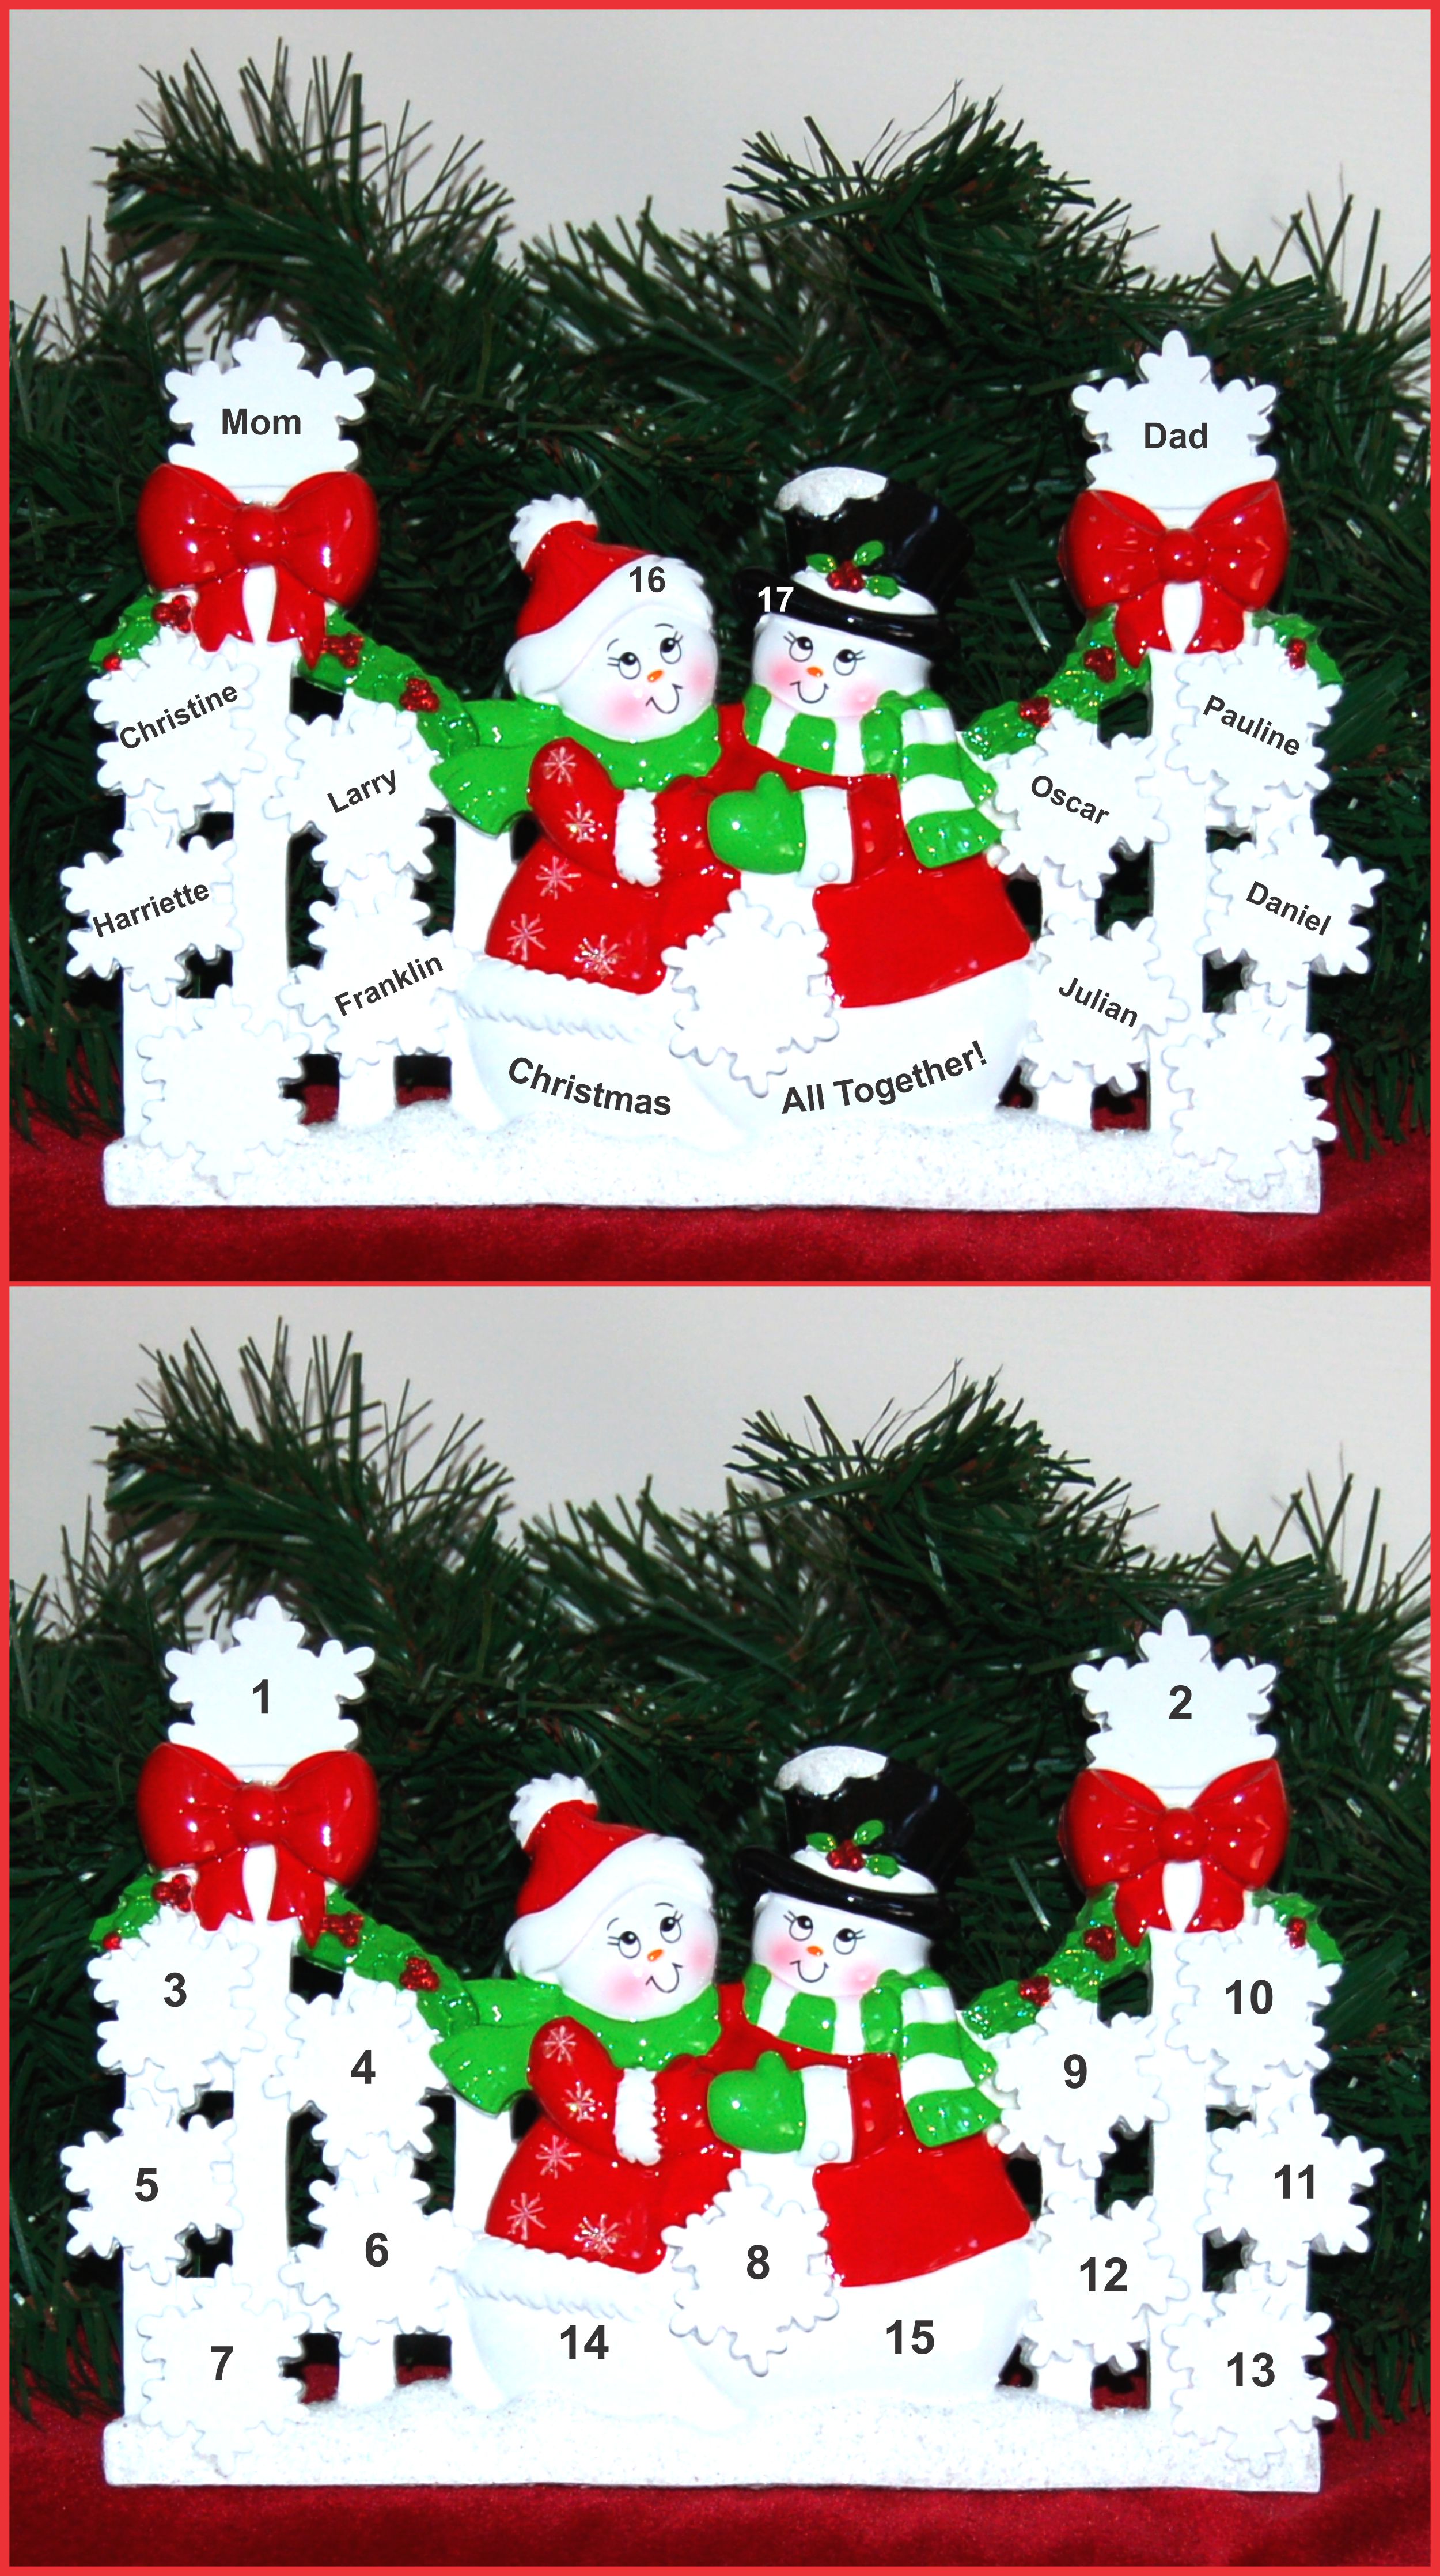 Family Tabletop Christmas Decoration Snowflakes Family of 10 Personalized by RussellRhodes.com